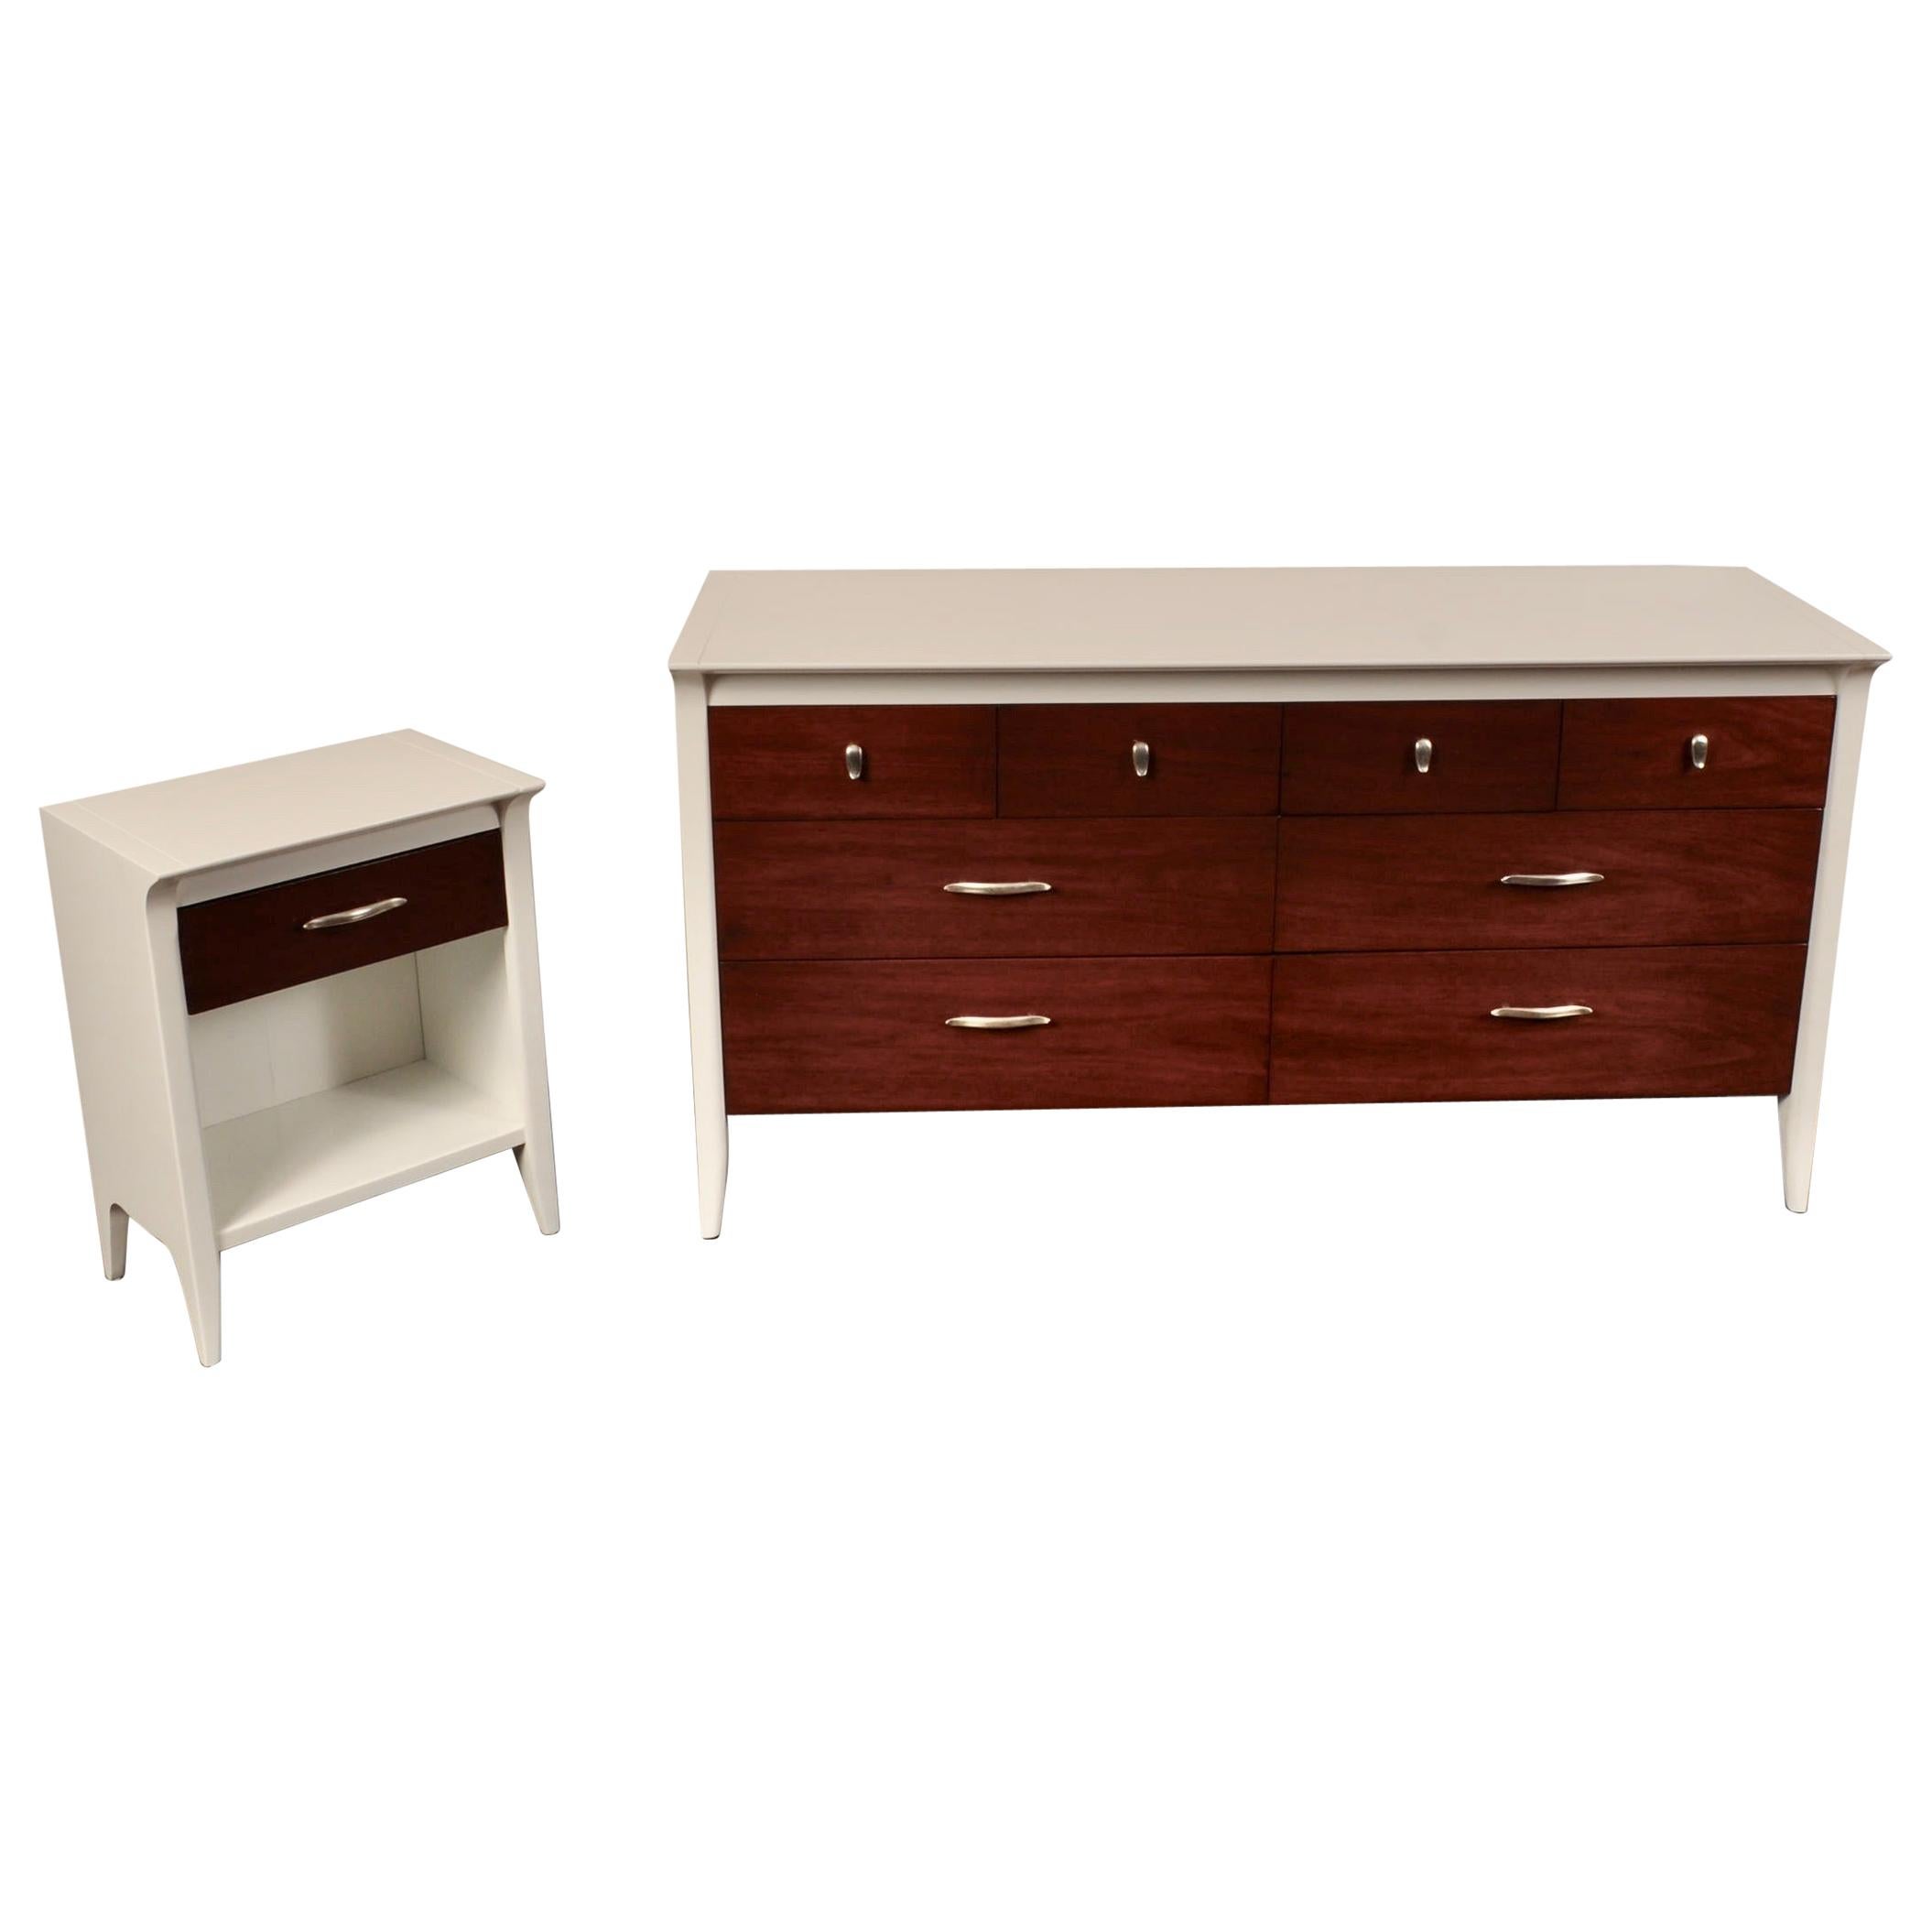 Lacquered Low Dresser and Nightstand by Drexel For Sale